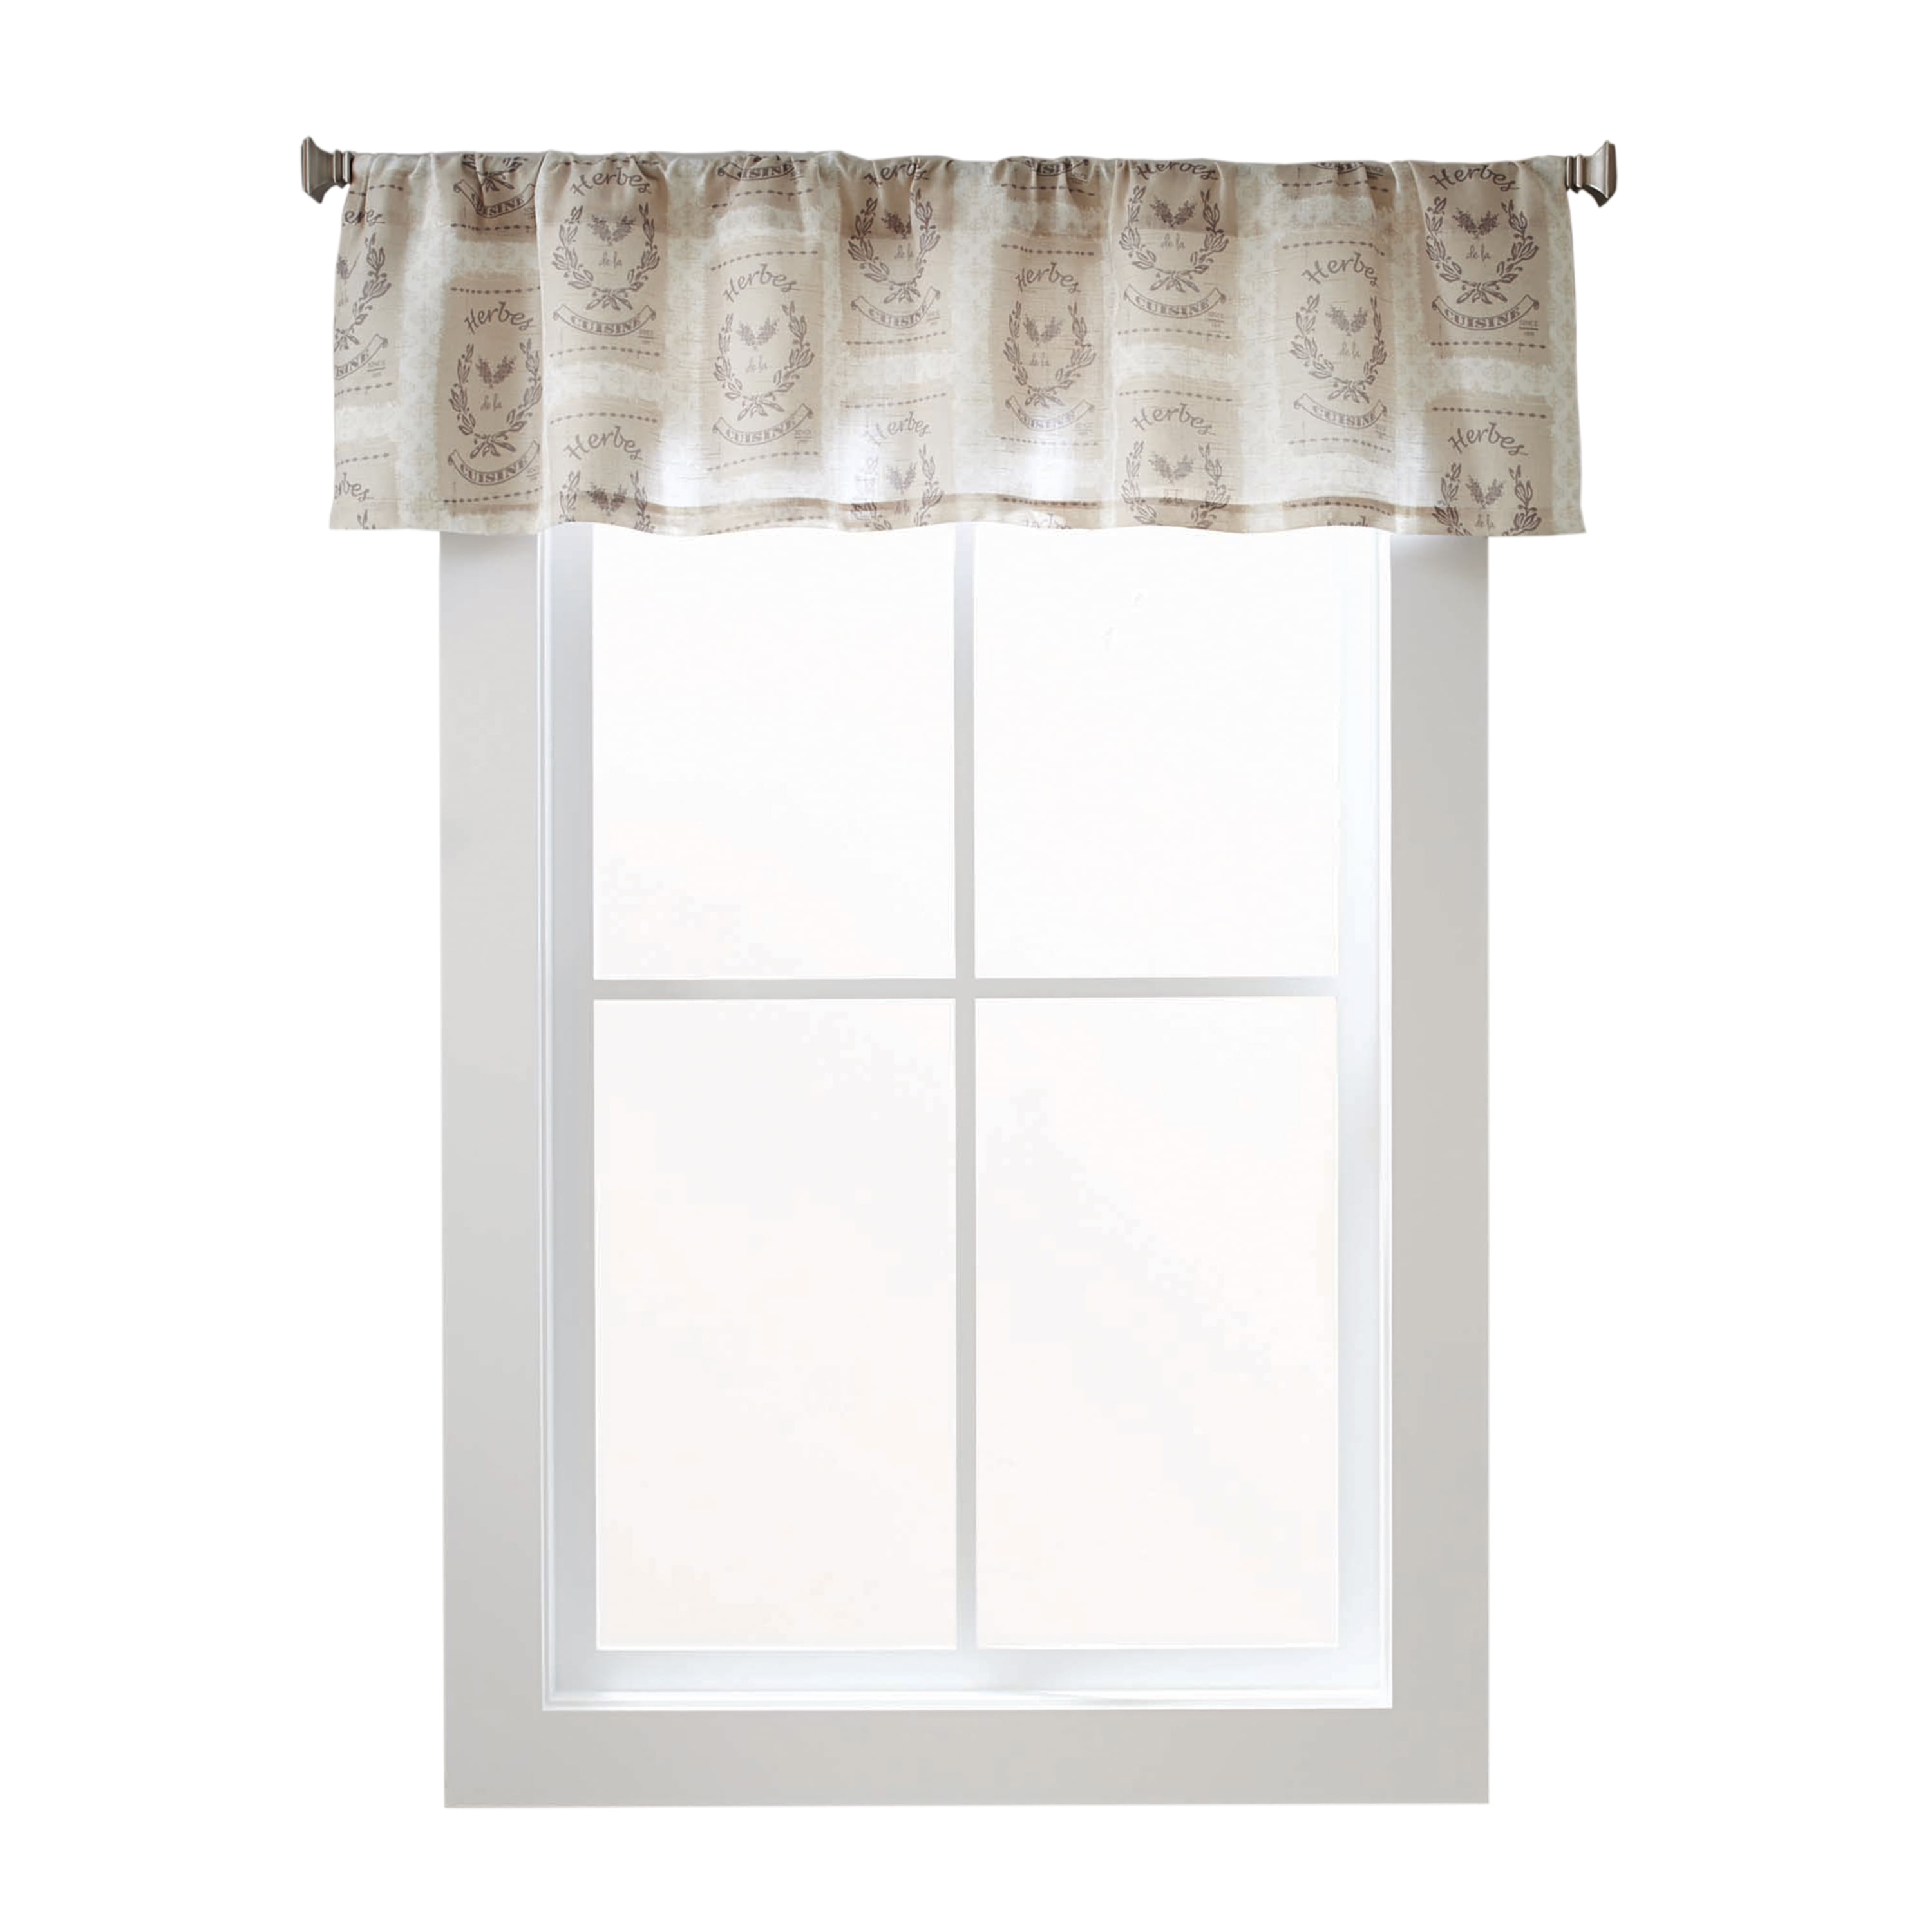 Lorraine Home Fashions White 48" wide by 16" long Medallion Macrame Valance 